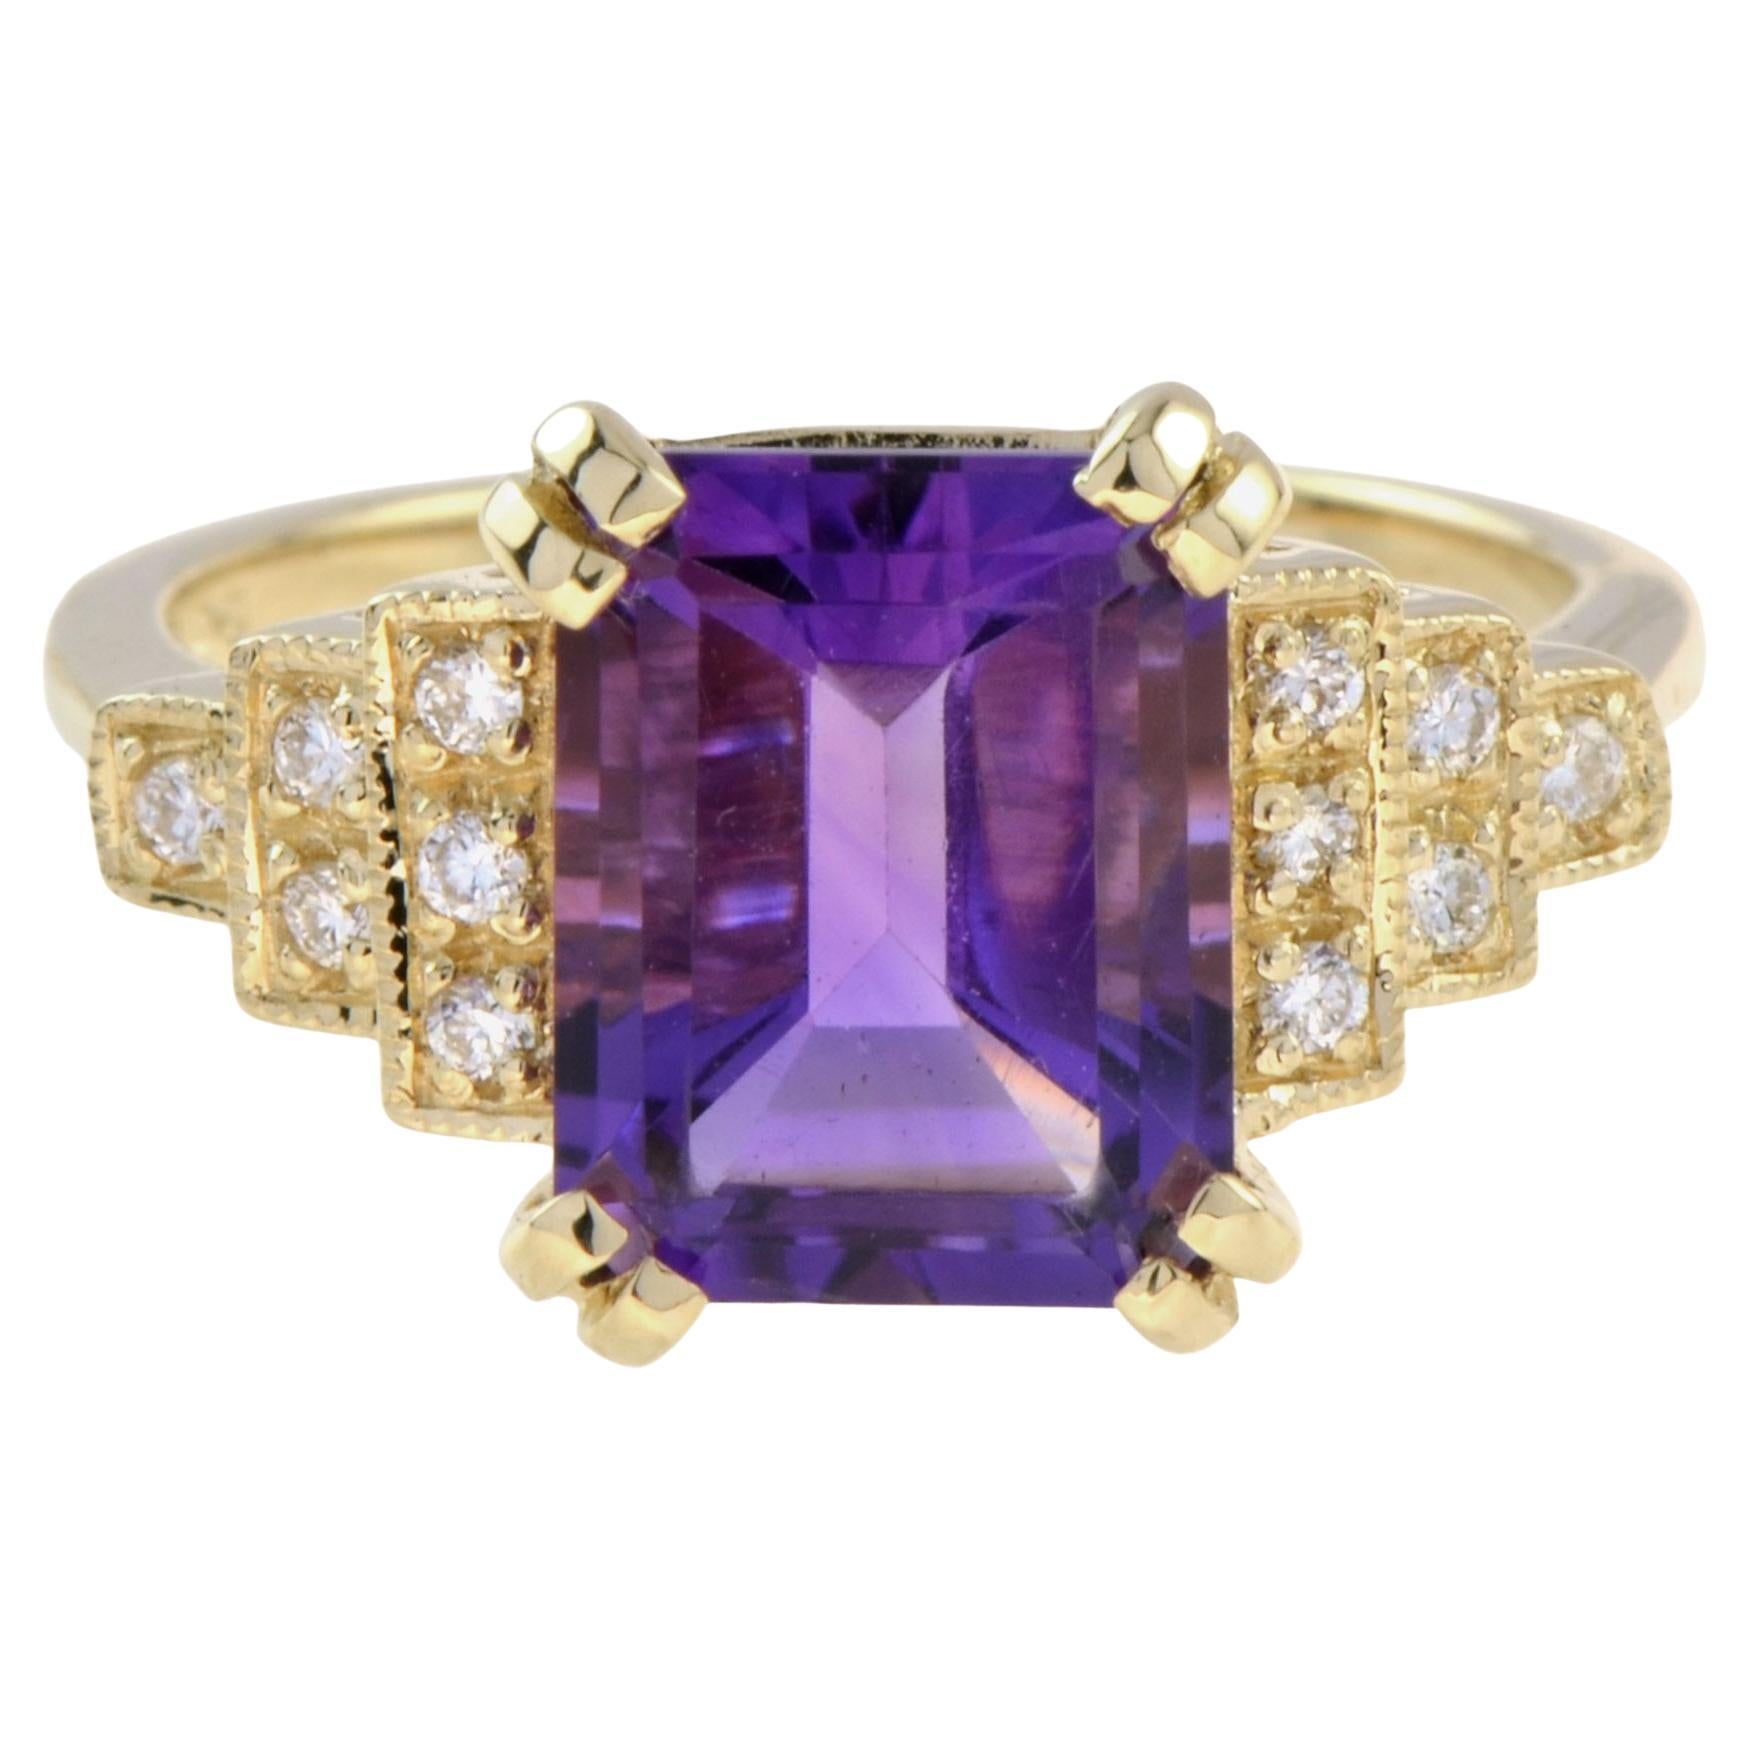 Emerald Cut Amethyst and Diamond Step Shoulder Engagement Ring in 14K Gold